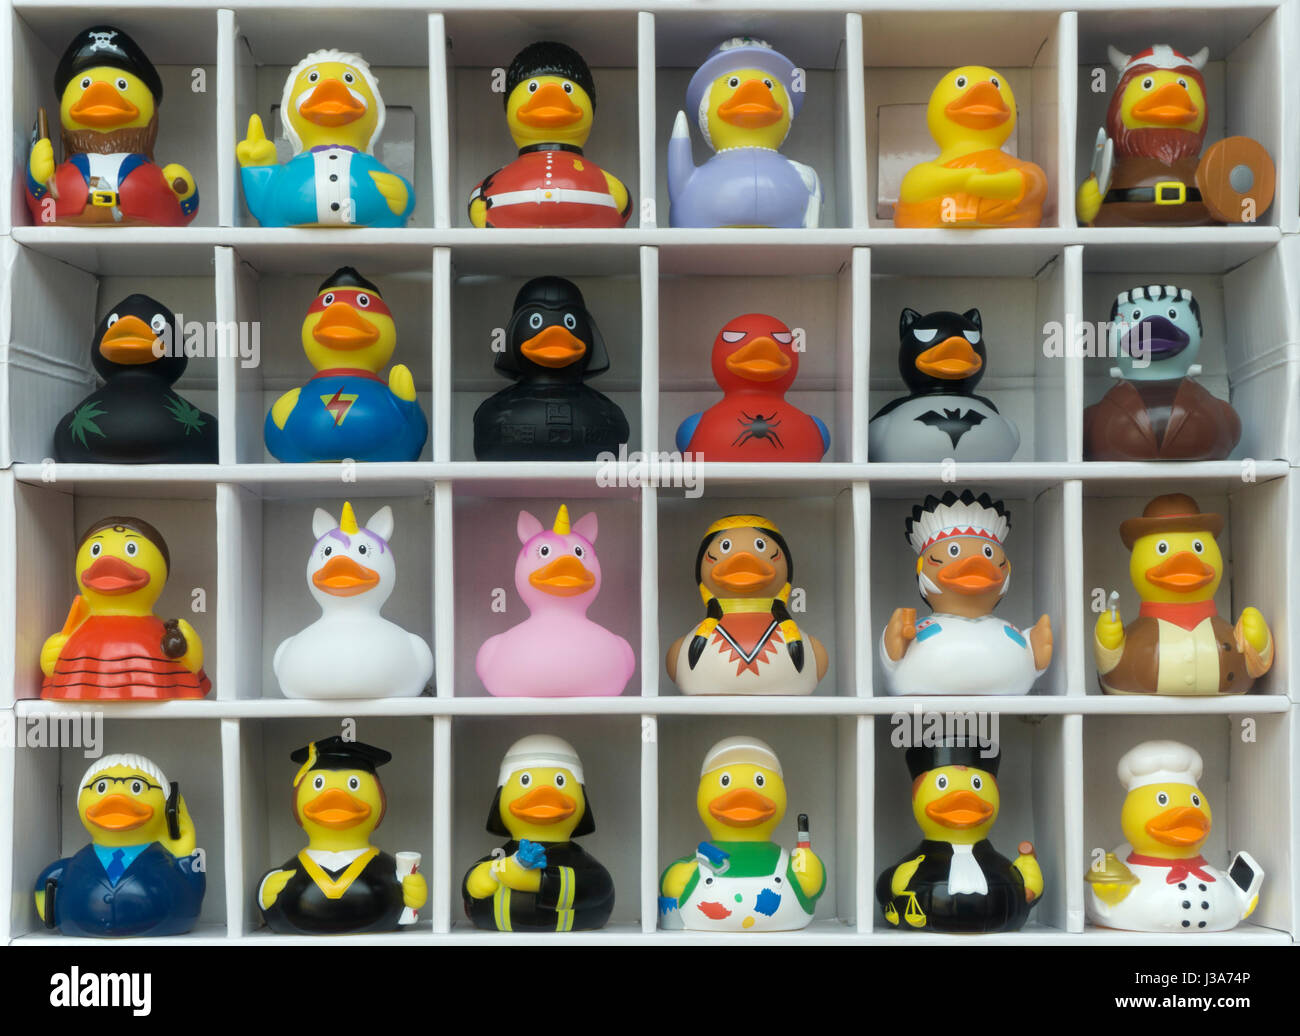 toy plastic ducks dressed for different careers Stock Photo